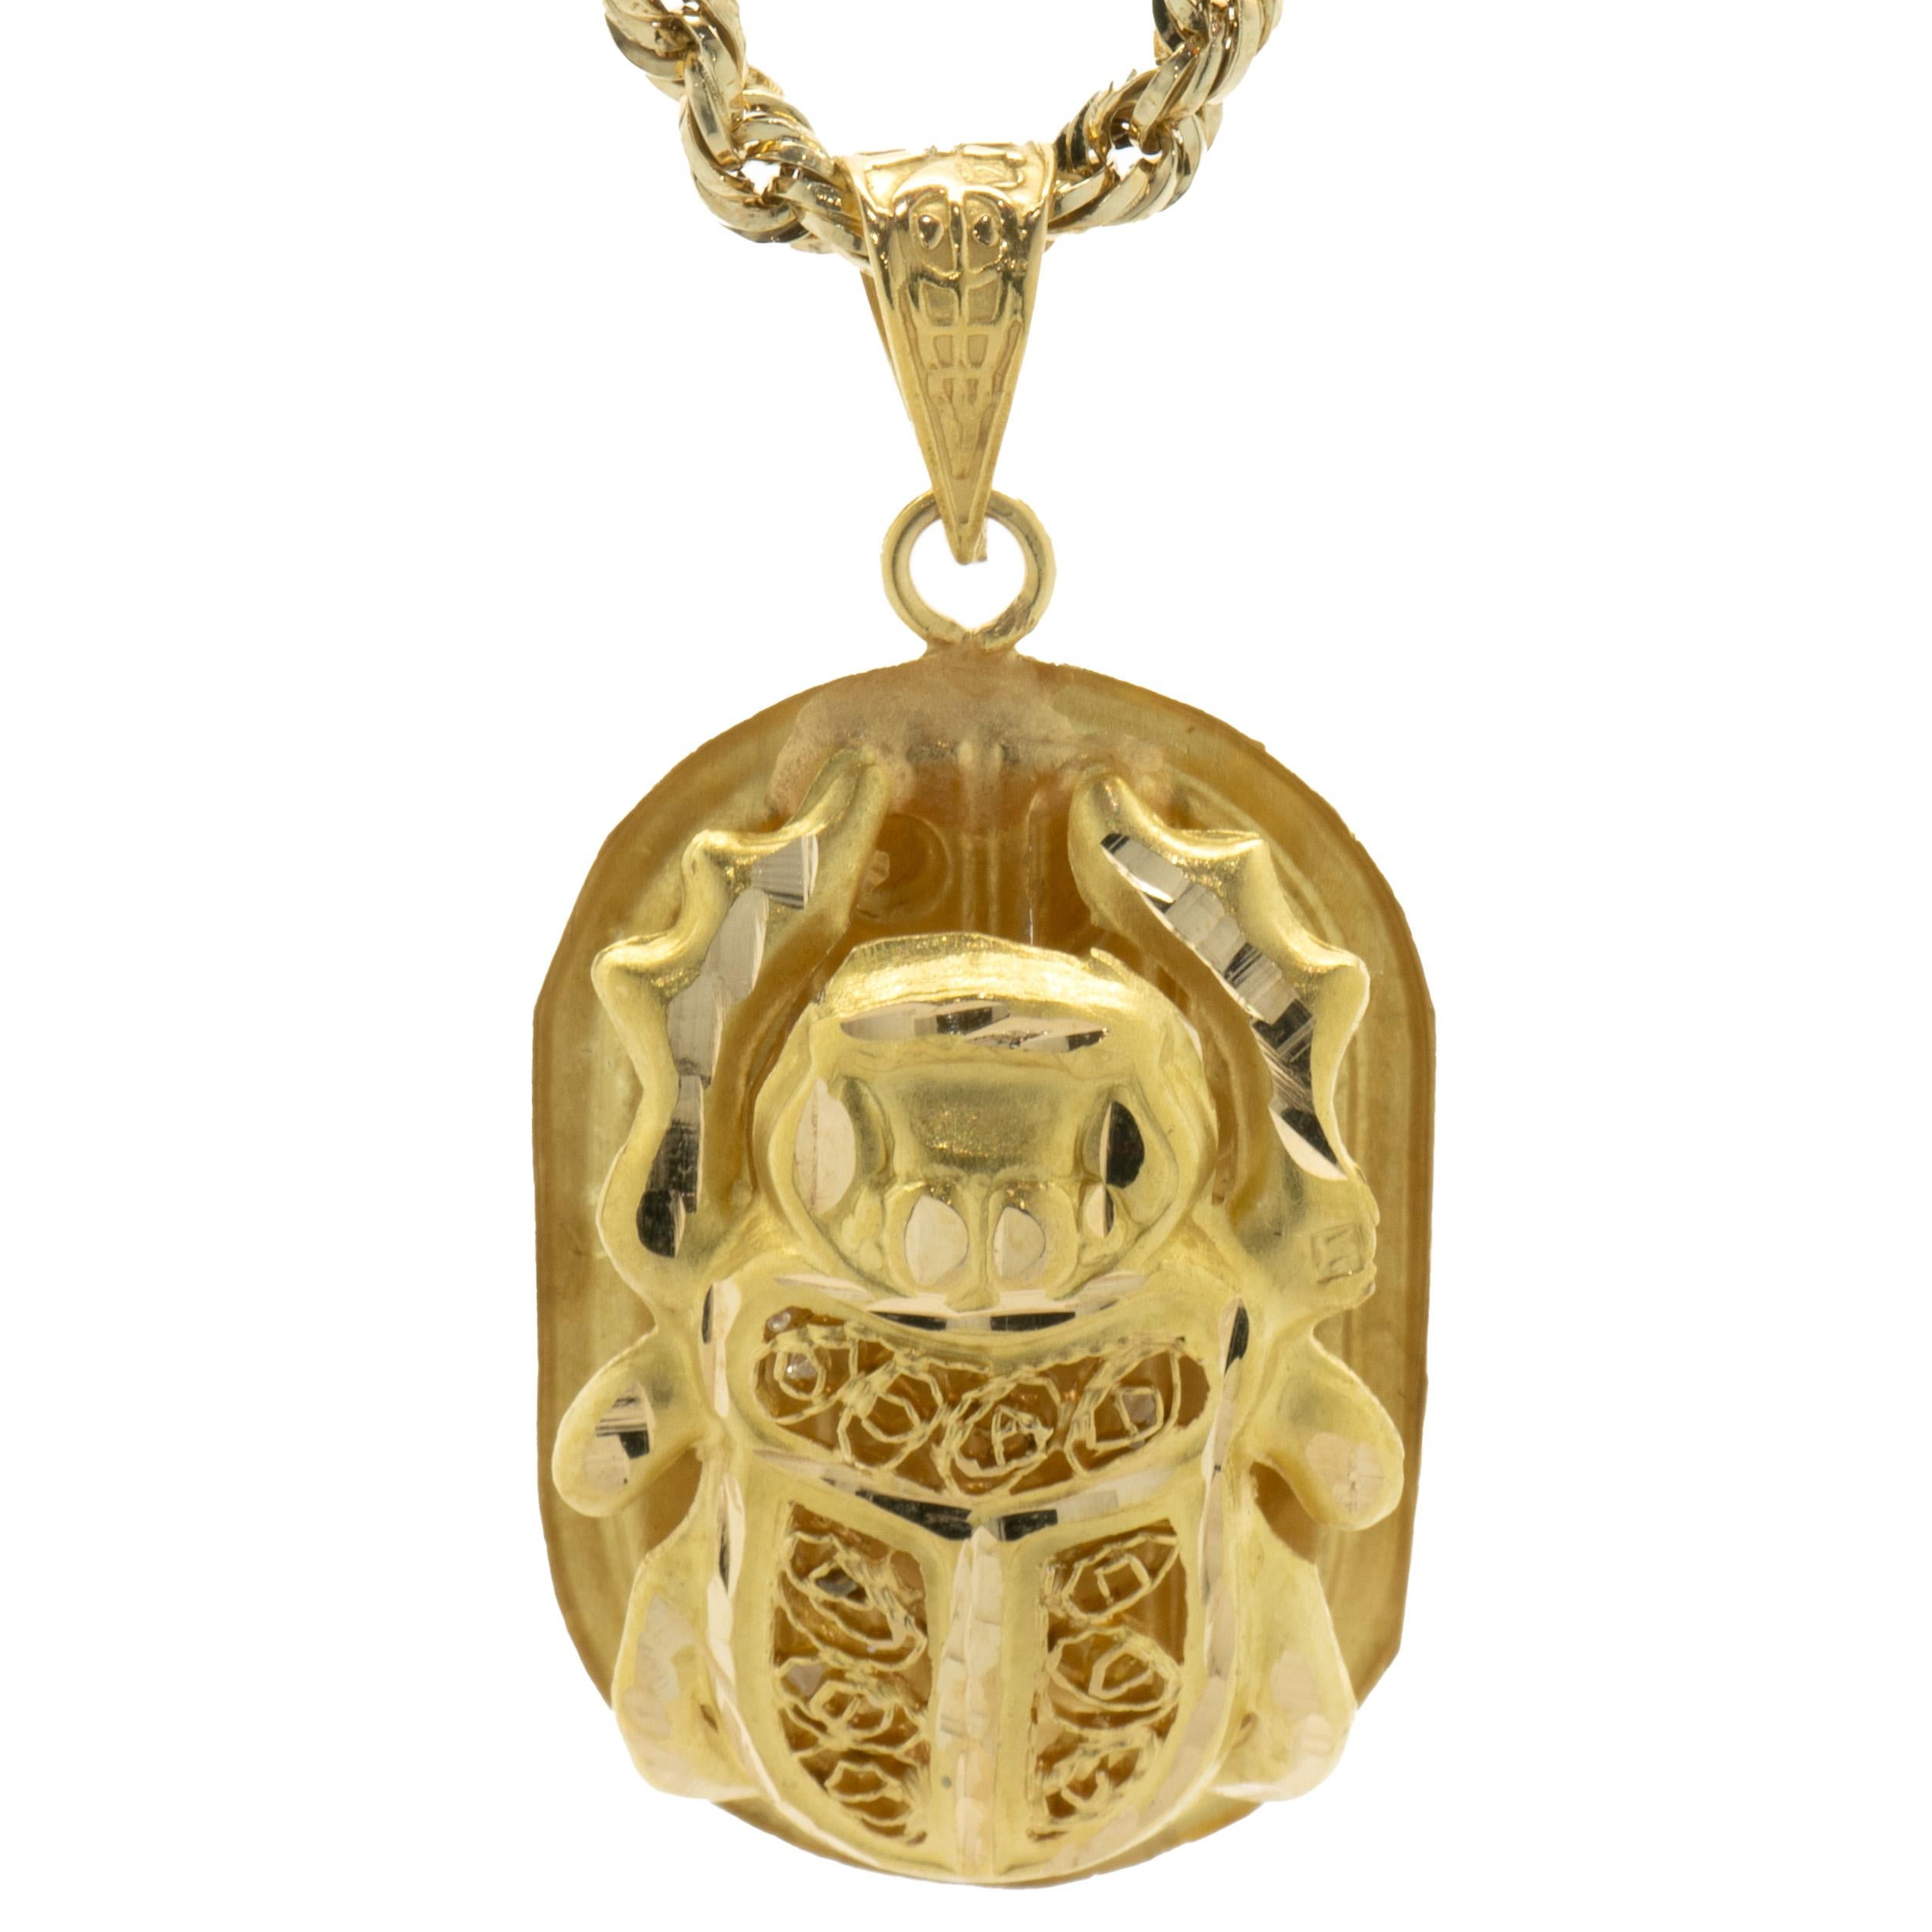 Designer: custom
Material: 14K yellow gold 
Dimensions: necklace measures 20-inches in length
Weight: 7.32 grams